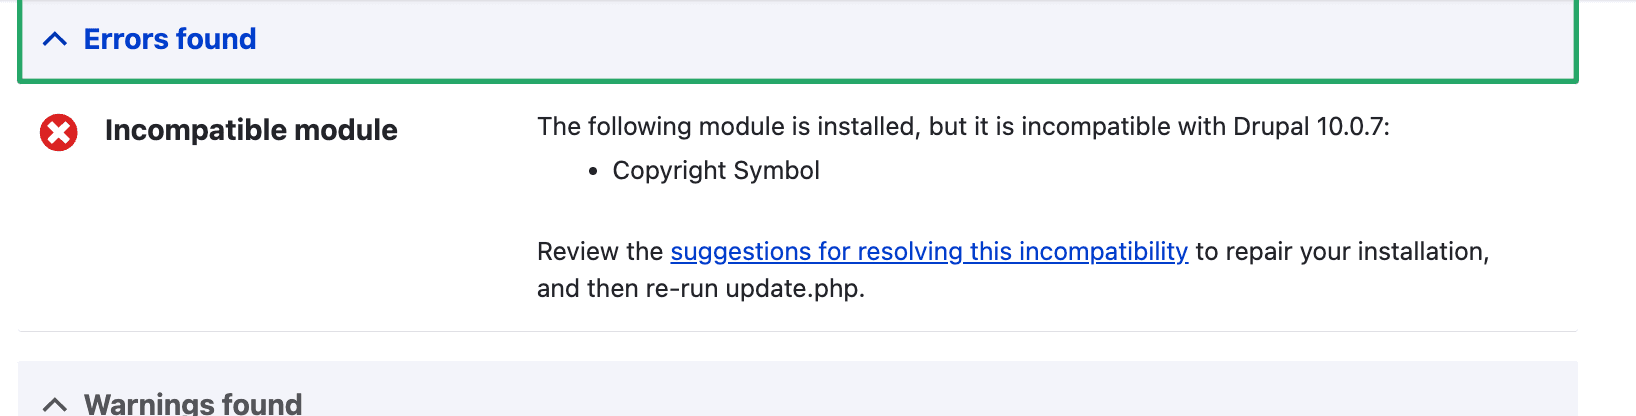 A warning that the module is incompatible with this version of Drupal